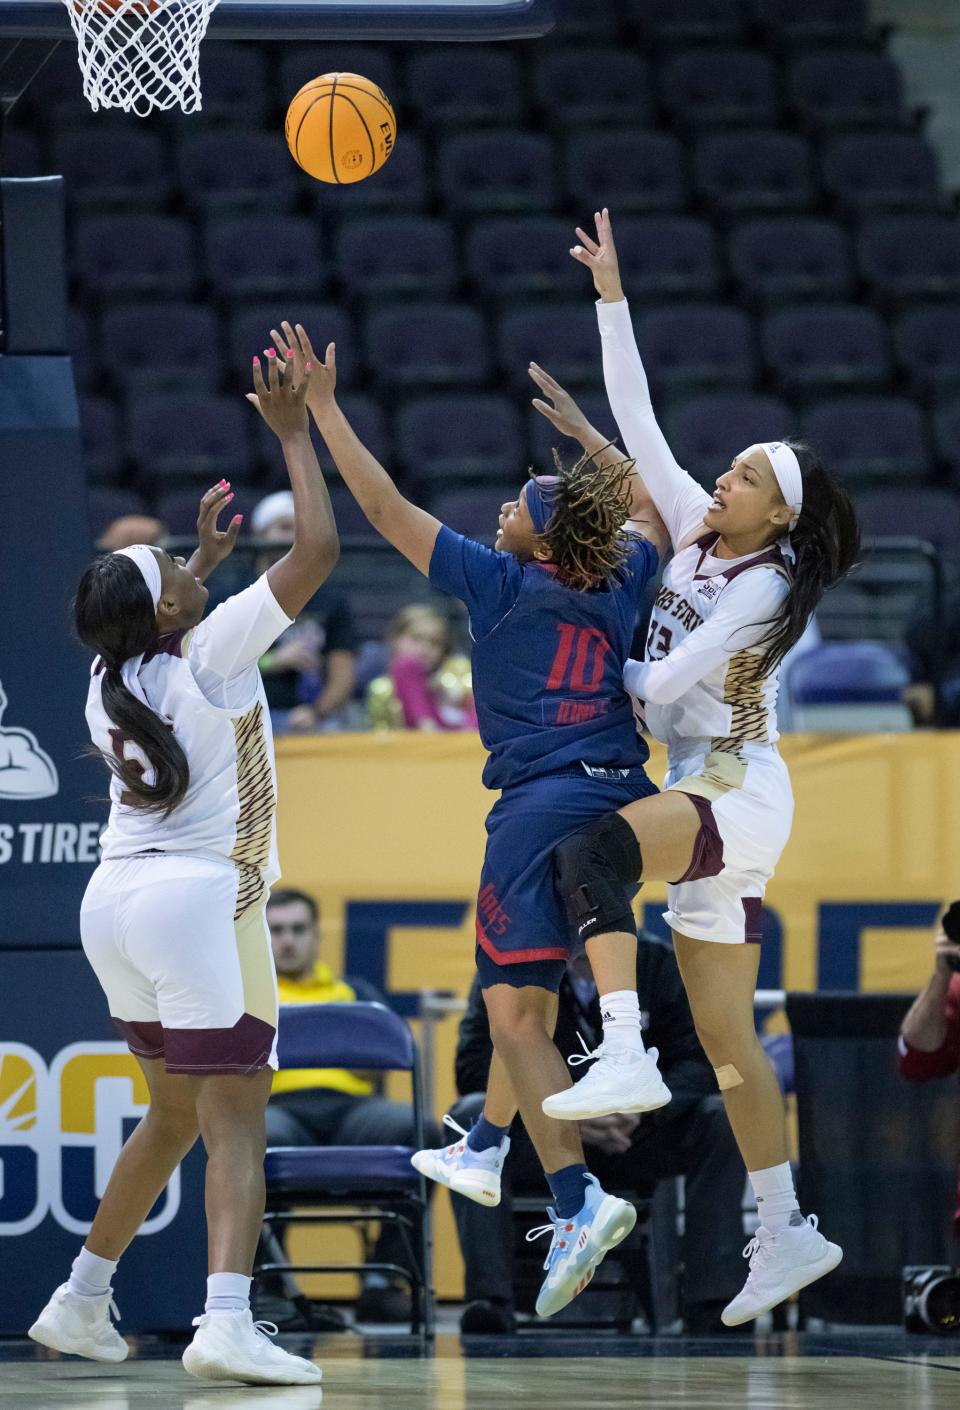 Janelle Jones (10), a Booker T. Washington High School graduate, fights for a rebound during South Alabama vs. Texas State women’s basketball game in the first round of the Sun Belt Conference championship tournament at the Pensacola Bay Center in Pensacola on Wednesday, March 2, 2022.